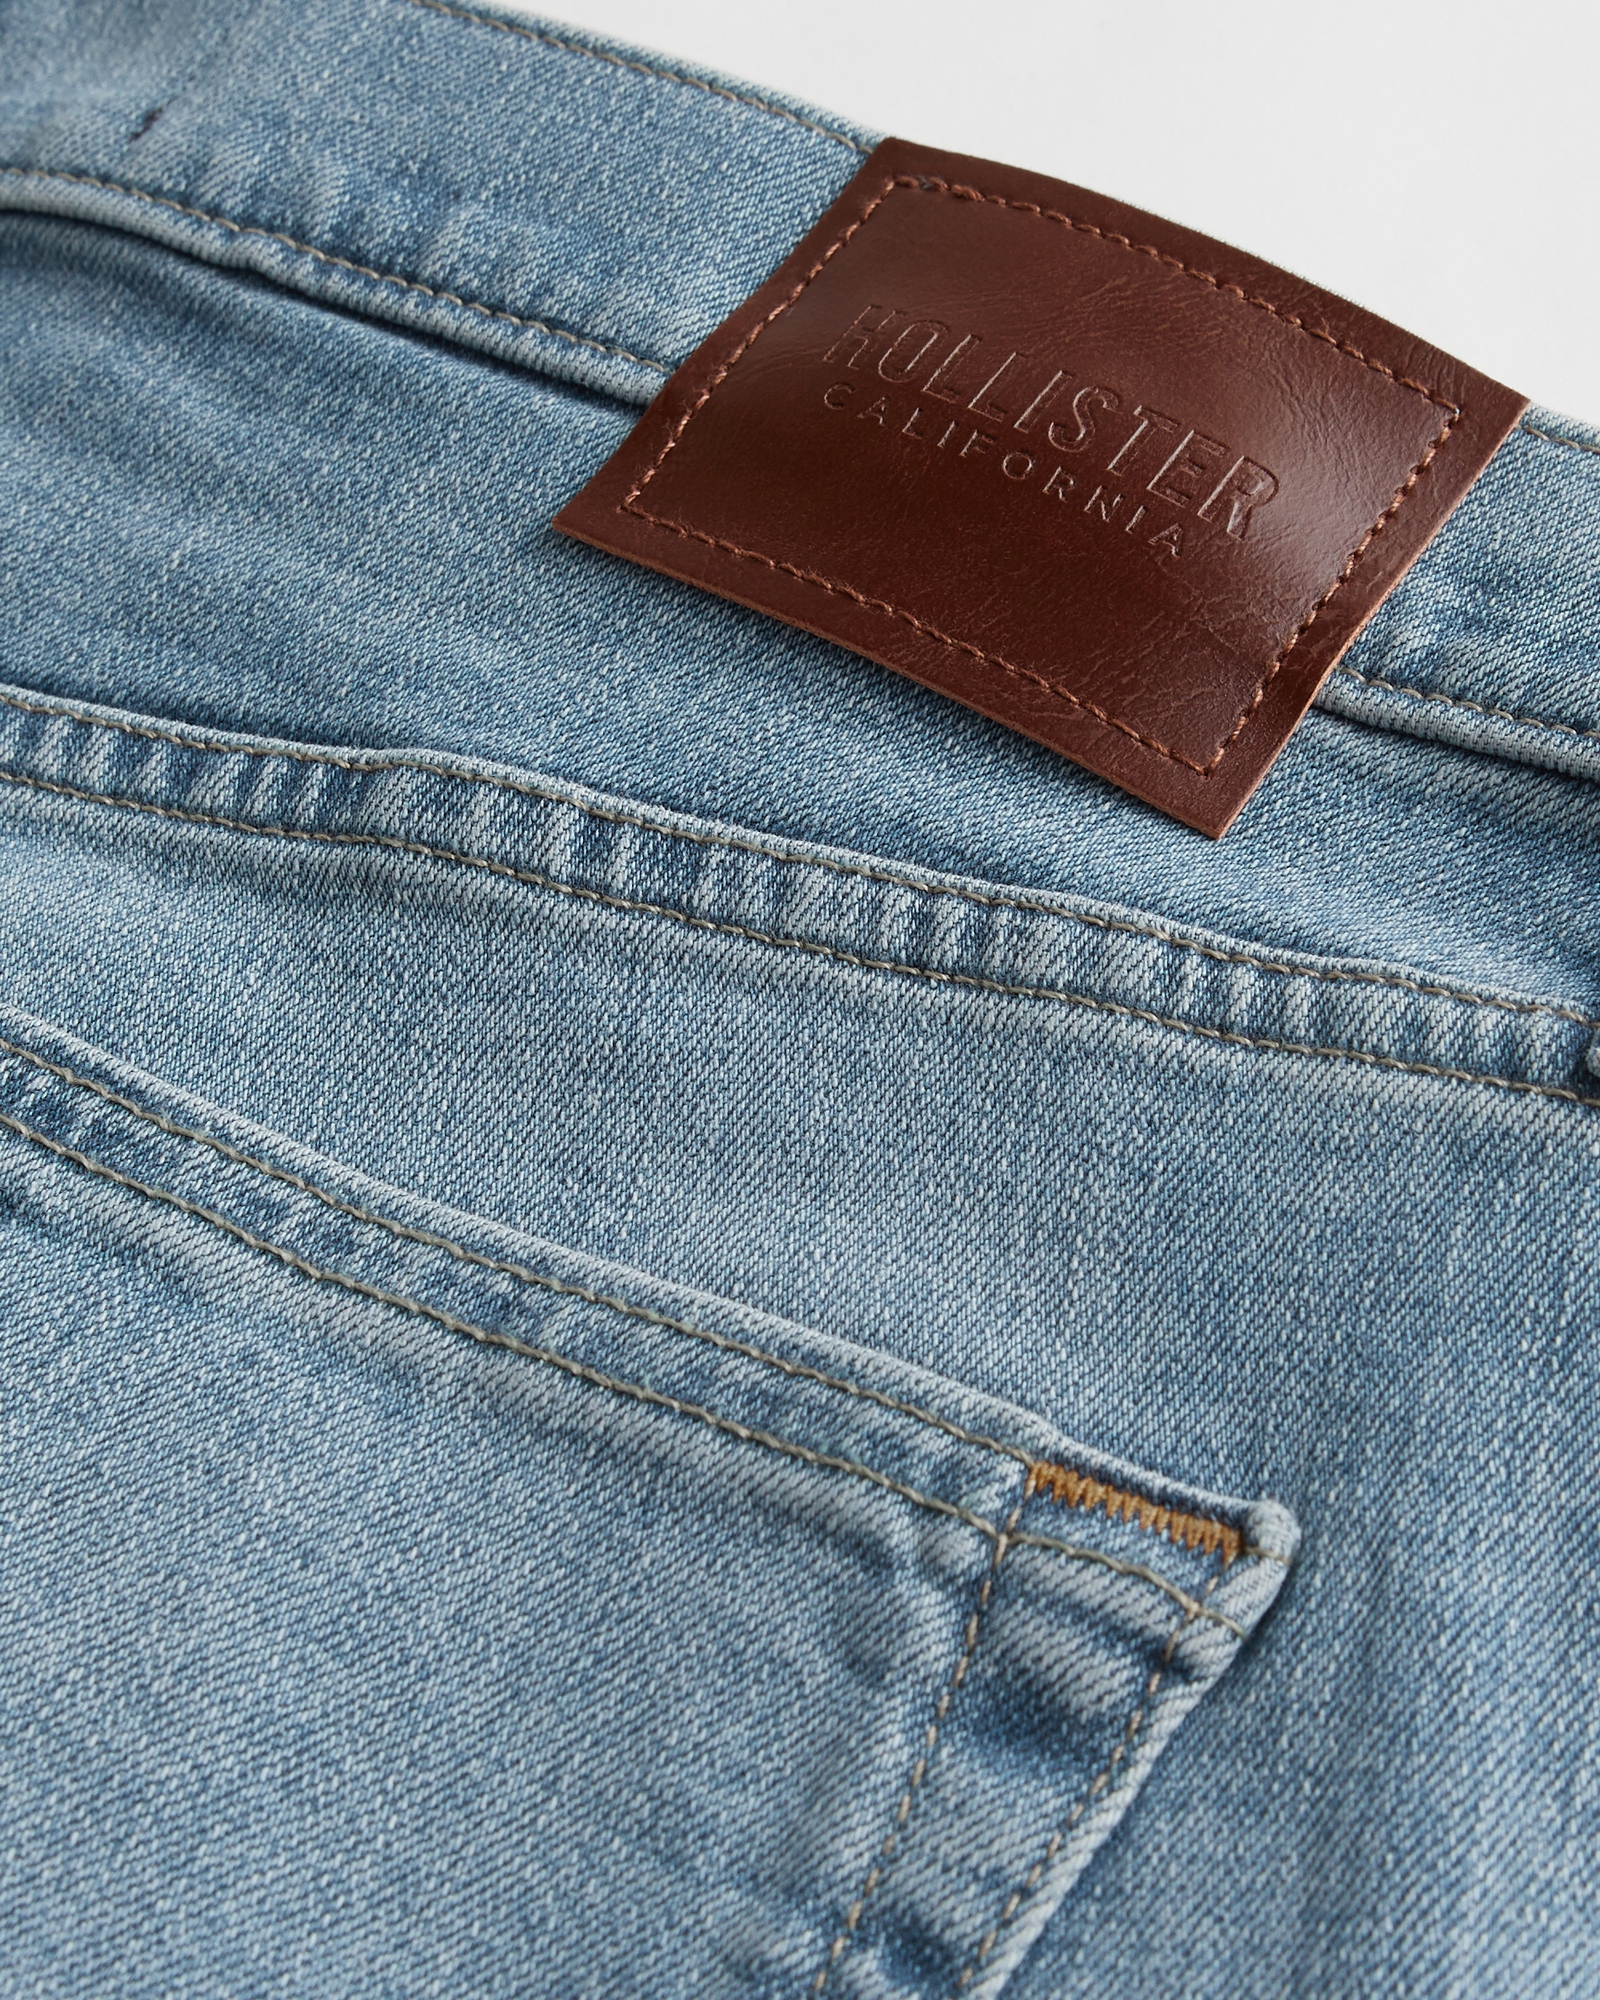 Hollister straight fit dry process wash jeans in dark wash